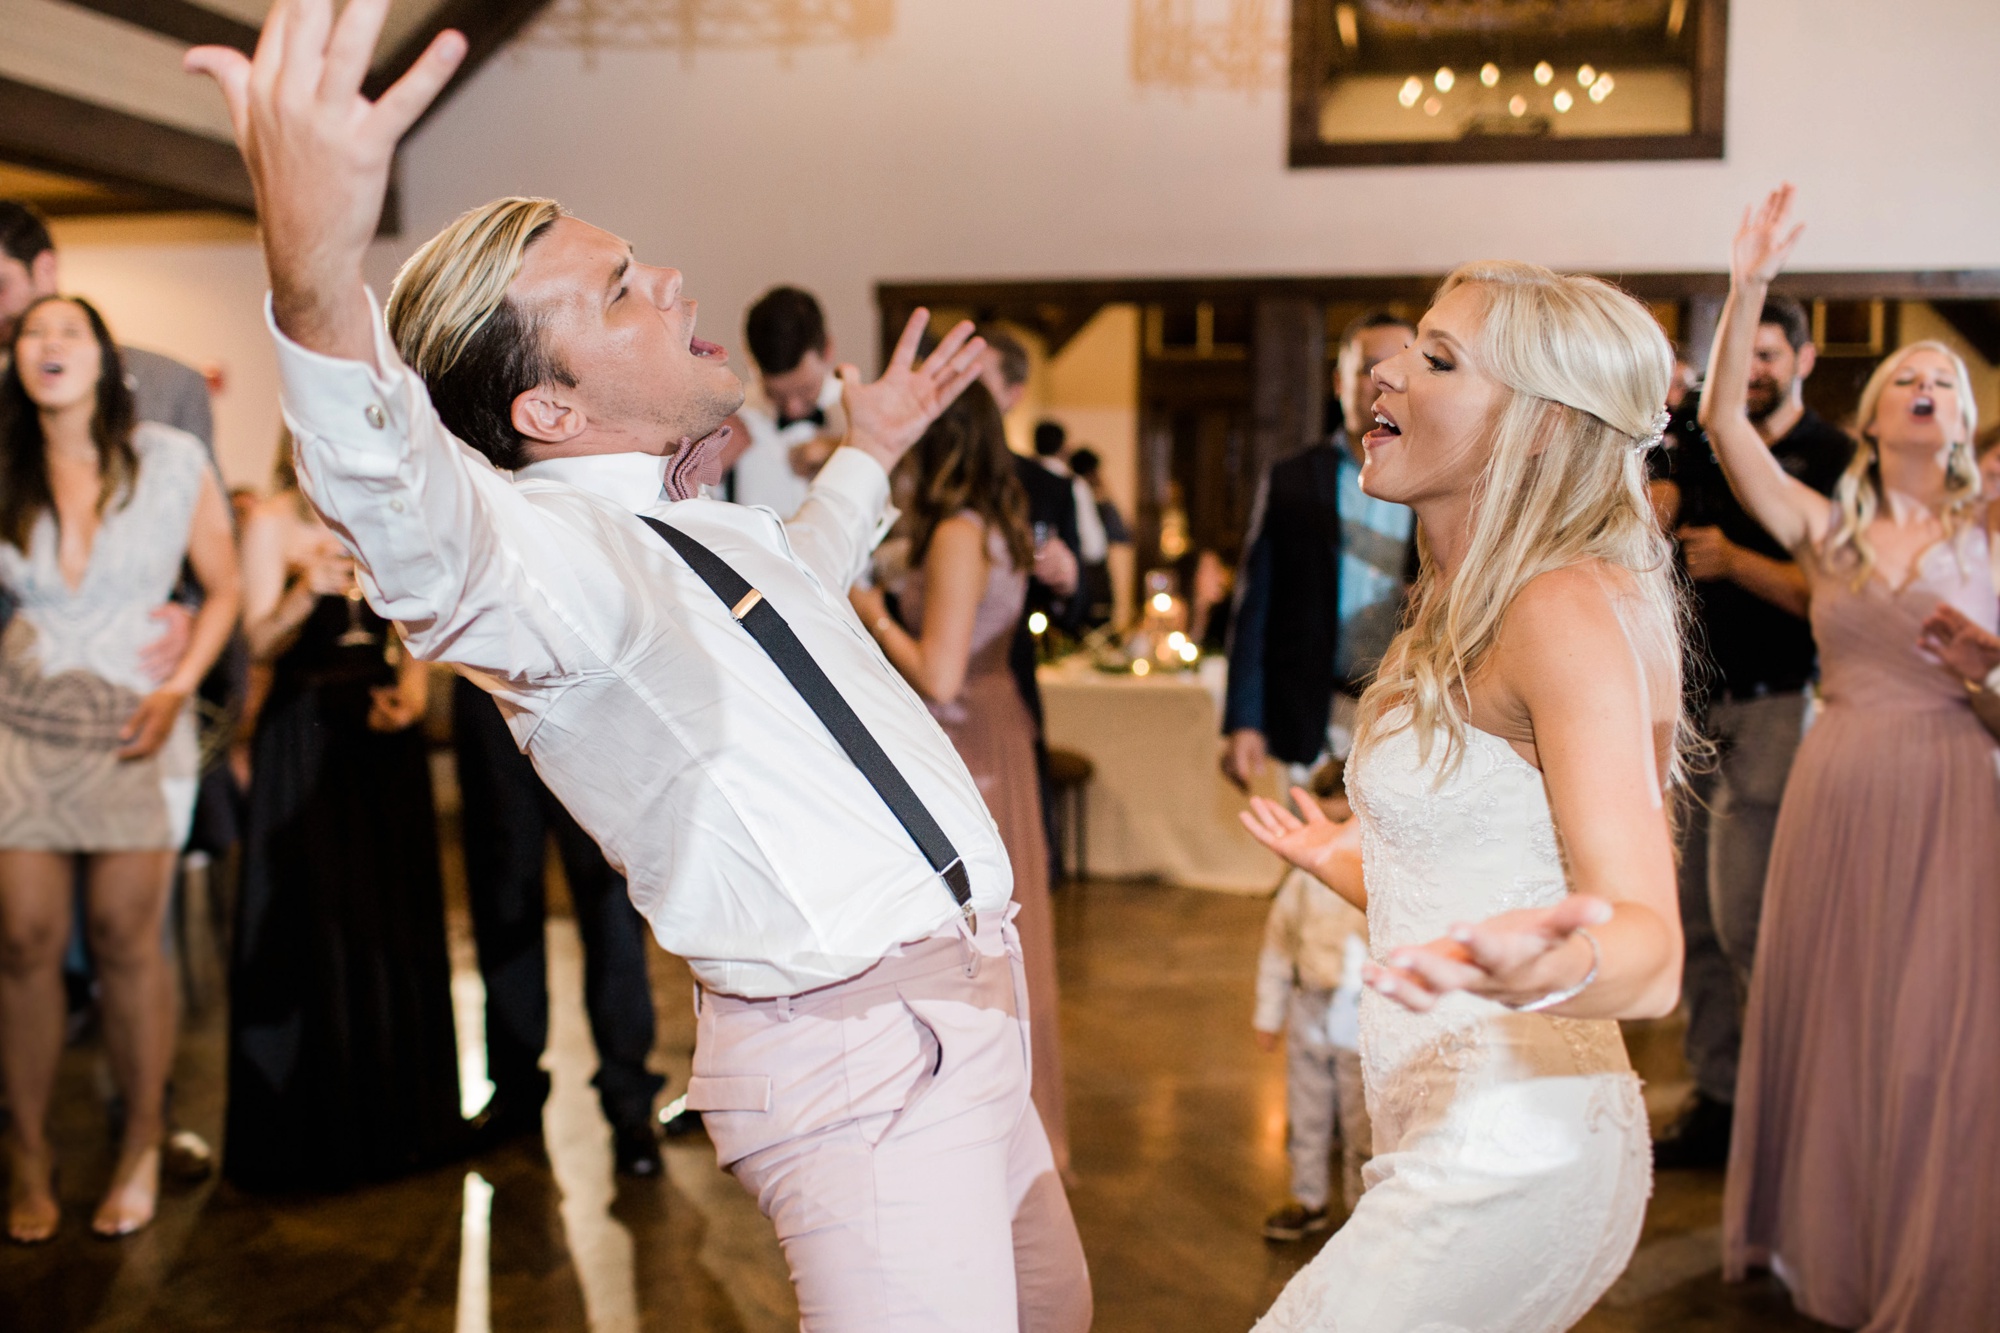 Your wedding reception should be a party! Make sure you have a photographer who is ready to party with you! Photo by Rebecca Cerasani